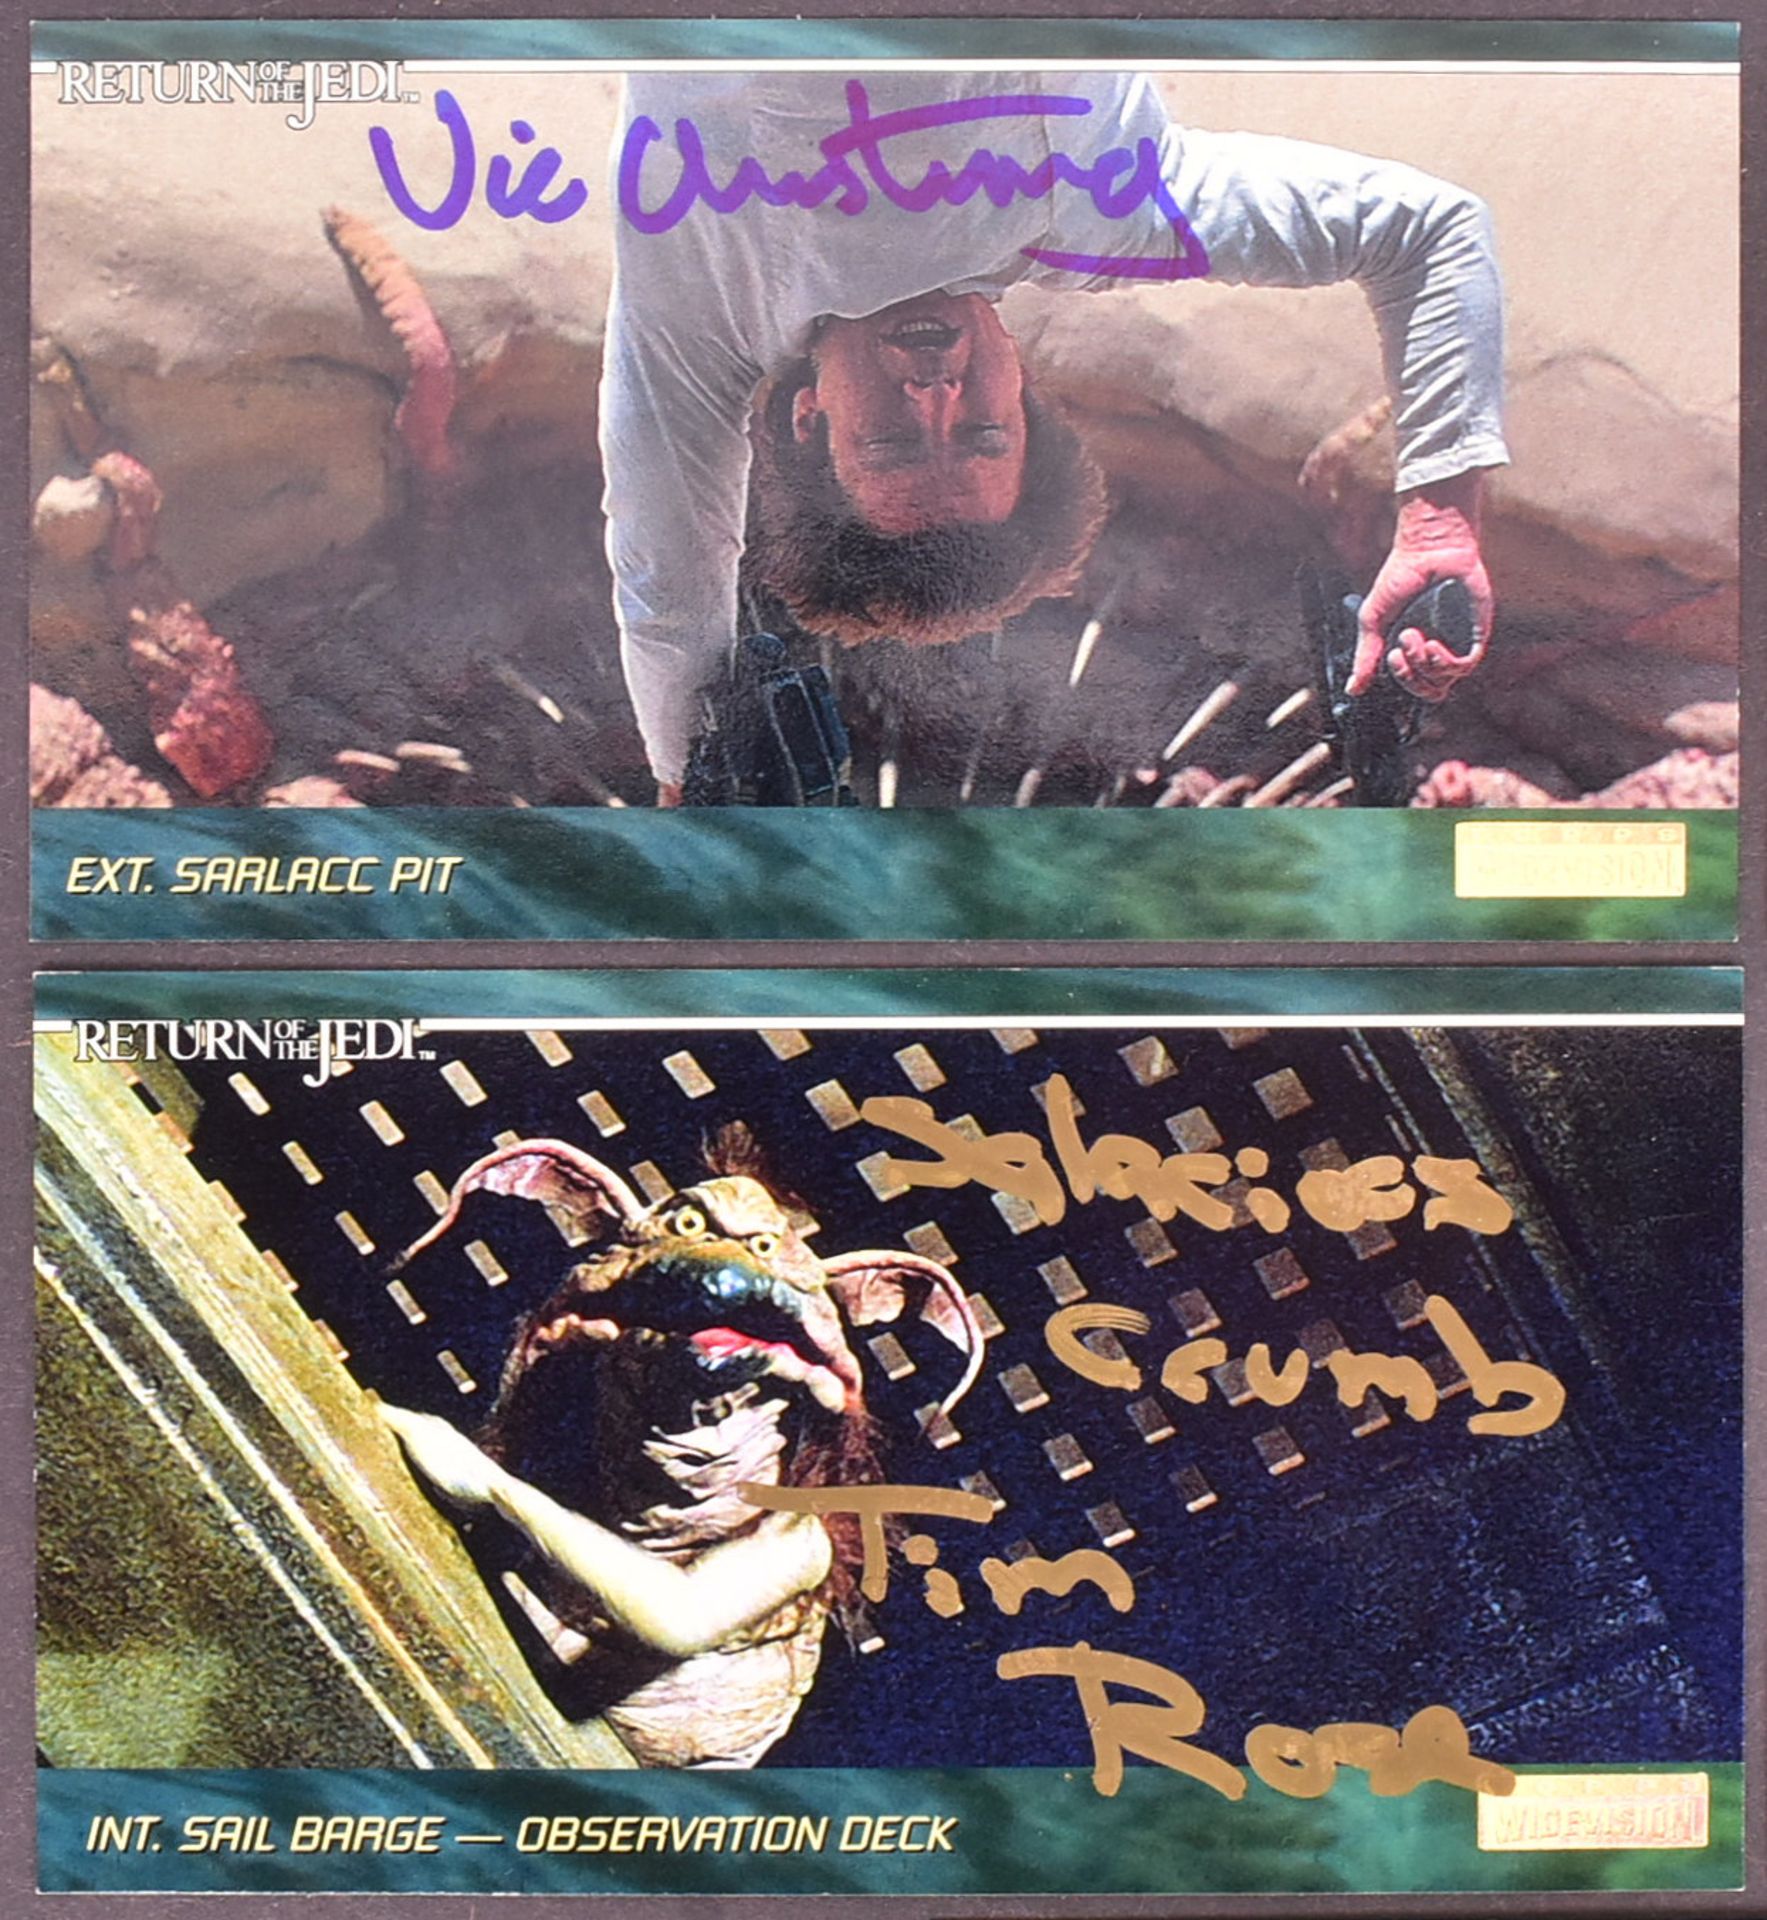 STAR WARS - ROTJ - TOPPS WIDEVISION SIGNED TRADING CARDS - Image 2 of 4